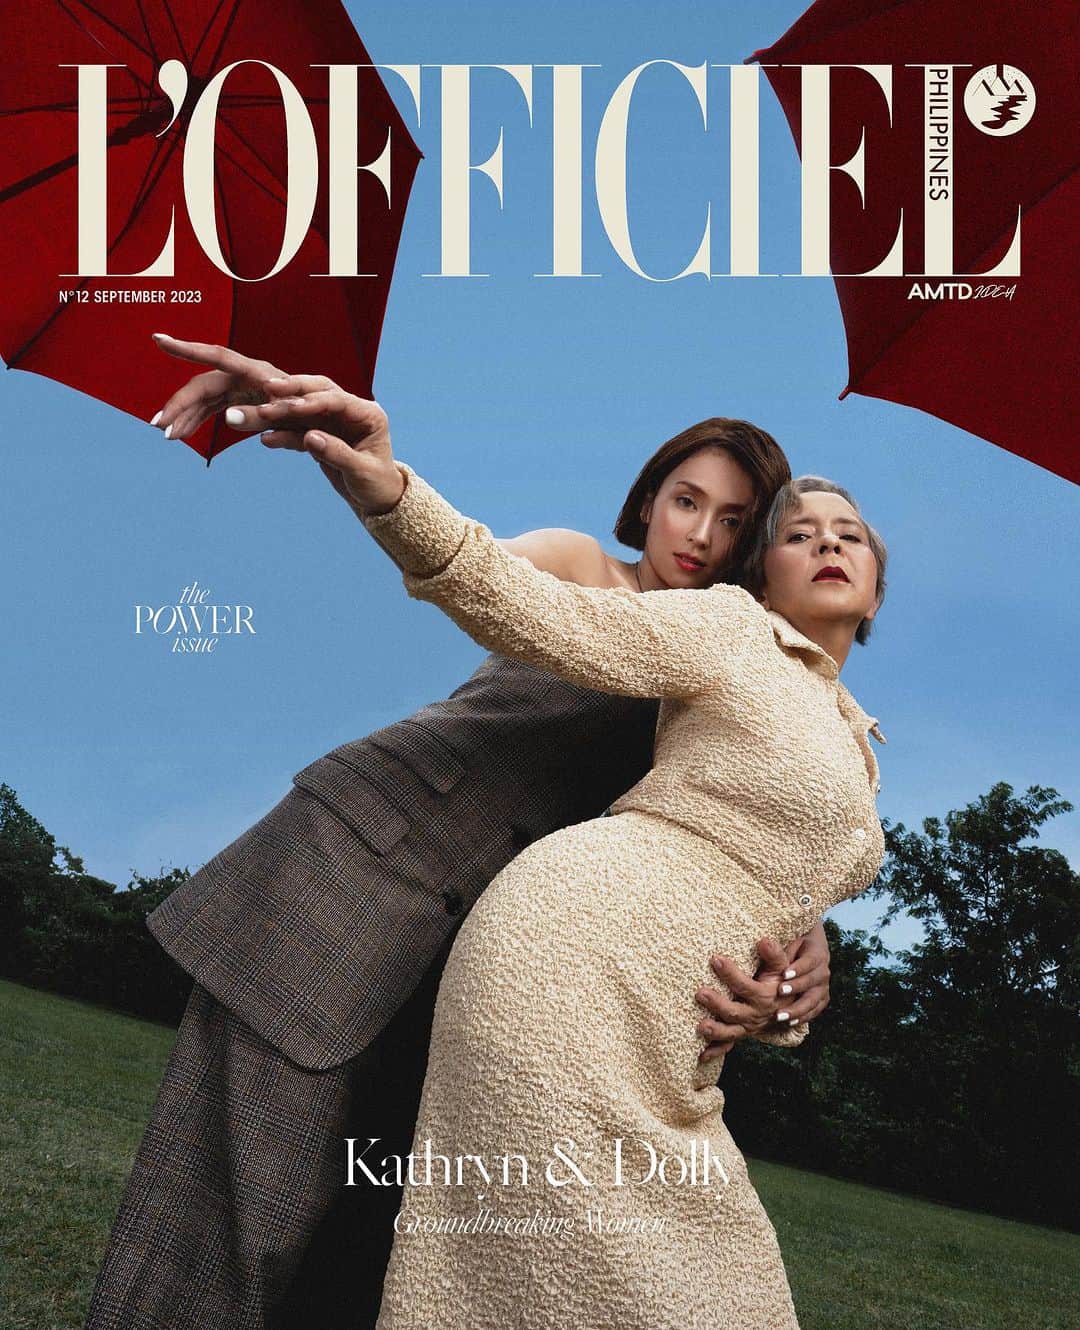 Kathryn Bernardoのインスタグラム：「Two actors, two talents, two women who have a lot more in common than you think—the bright stars of our September 2023 cover are Dolly de Leon and Kathryn Bernardo.   Link in bio for a digital sneak peek, and read the FULL cover story in our latest print edition available via lofficielph.com   Photography by Charisma Lico Styling and creative direction by Loris Peña Produced by Loris Peña and Yanna Lopez Hair by Brent Sales and John Valle Makeup by Ricci Chan and Justine Del Rosario Video direction by Aijalonica Lei Light direction by Joey Alvero Shoot assistant: Tere Gabat Photo assistants: Jaz Orbe, Ruel Constantino, JR Paylon, and Erwin Arda Video assistant: Diane Bernardo Cover story by Jam Pascual Intern: Frances Laman Location: The Old Grove Farmstead, Lipa, Batangas  #KathDollyforLOfficielPh #LOfficielPH」